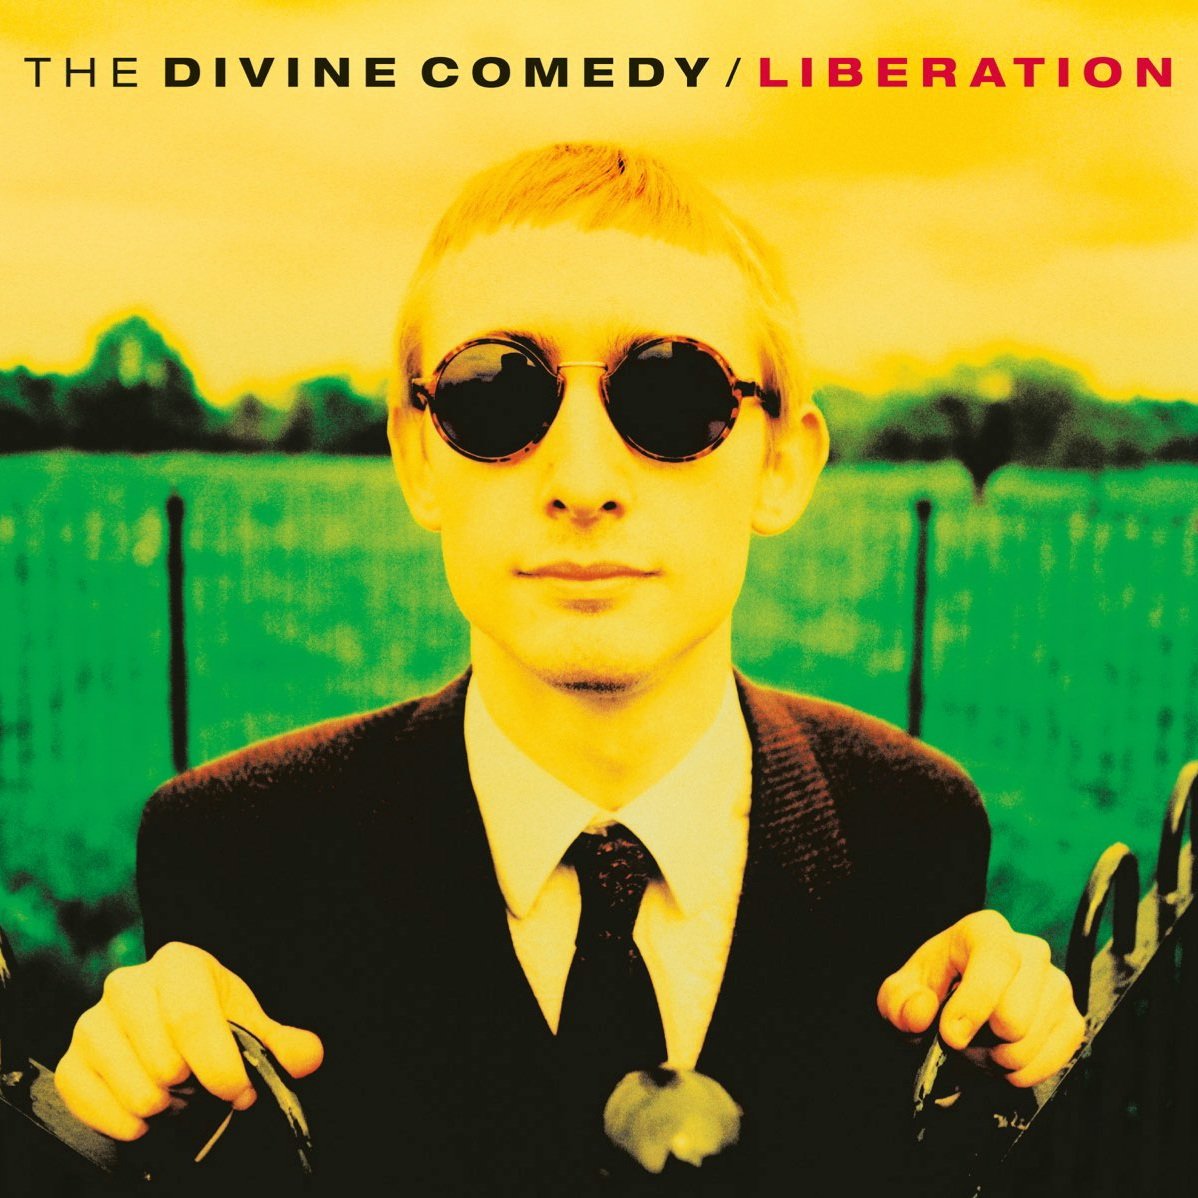 668th
LIBERATION
THE DIVINE COMEDY
August 16, 1993

#午前七時の名盤祭2
#TheDivineComedy
youtu.be/M5kxOTHw3-M